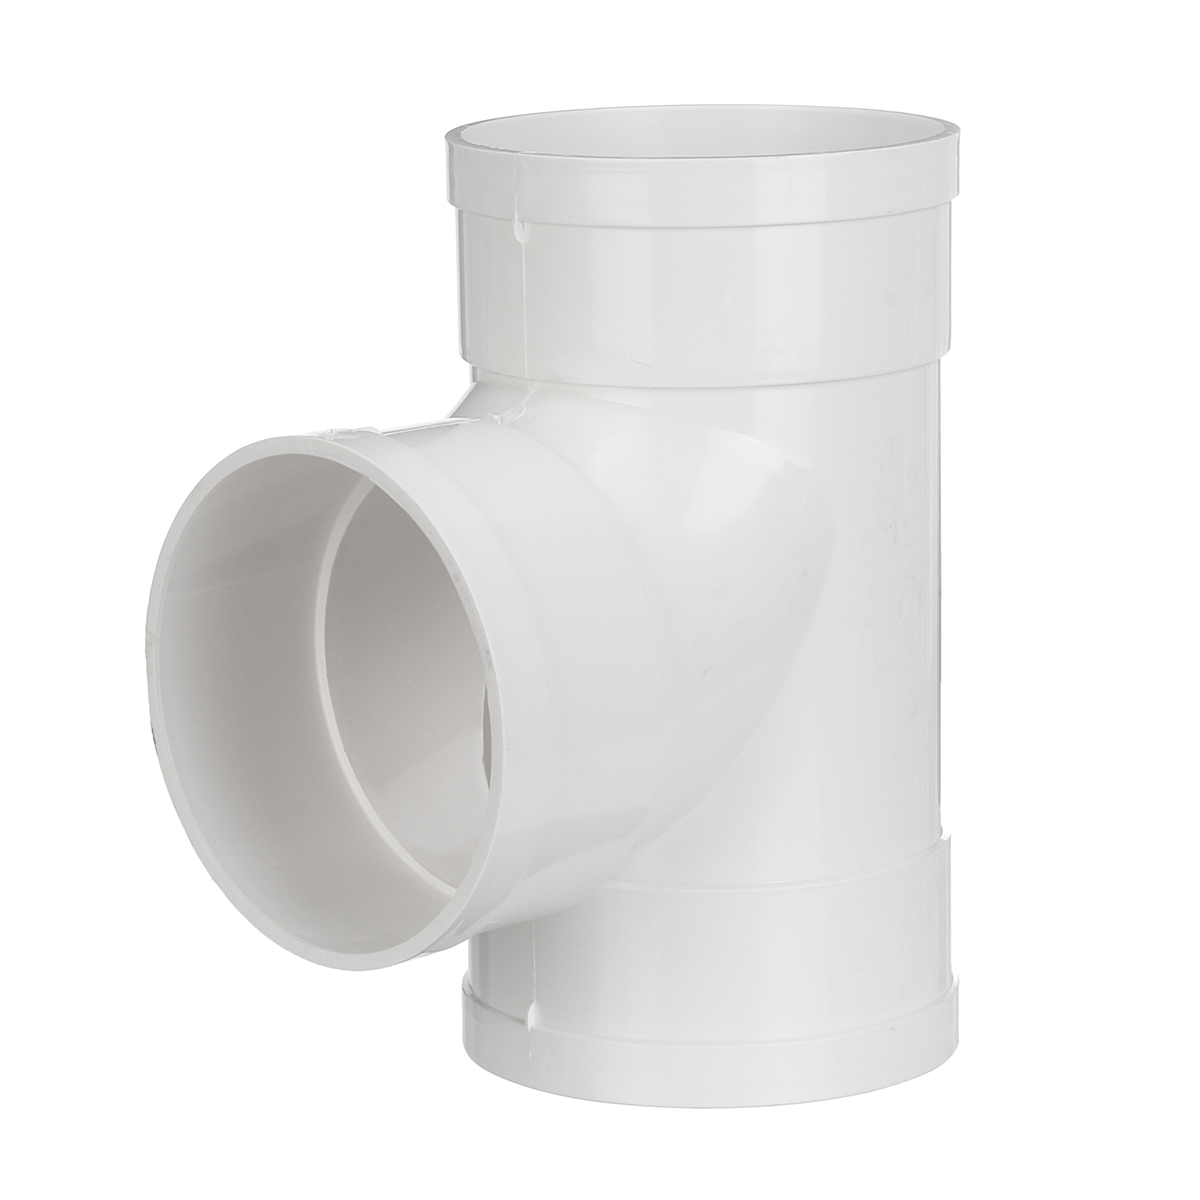 Equal-T-Piece-For-125mm-Round-Pipe-Ducting-Plastic-Kitchen-Ventilation-Duct-Pipe-1714220